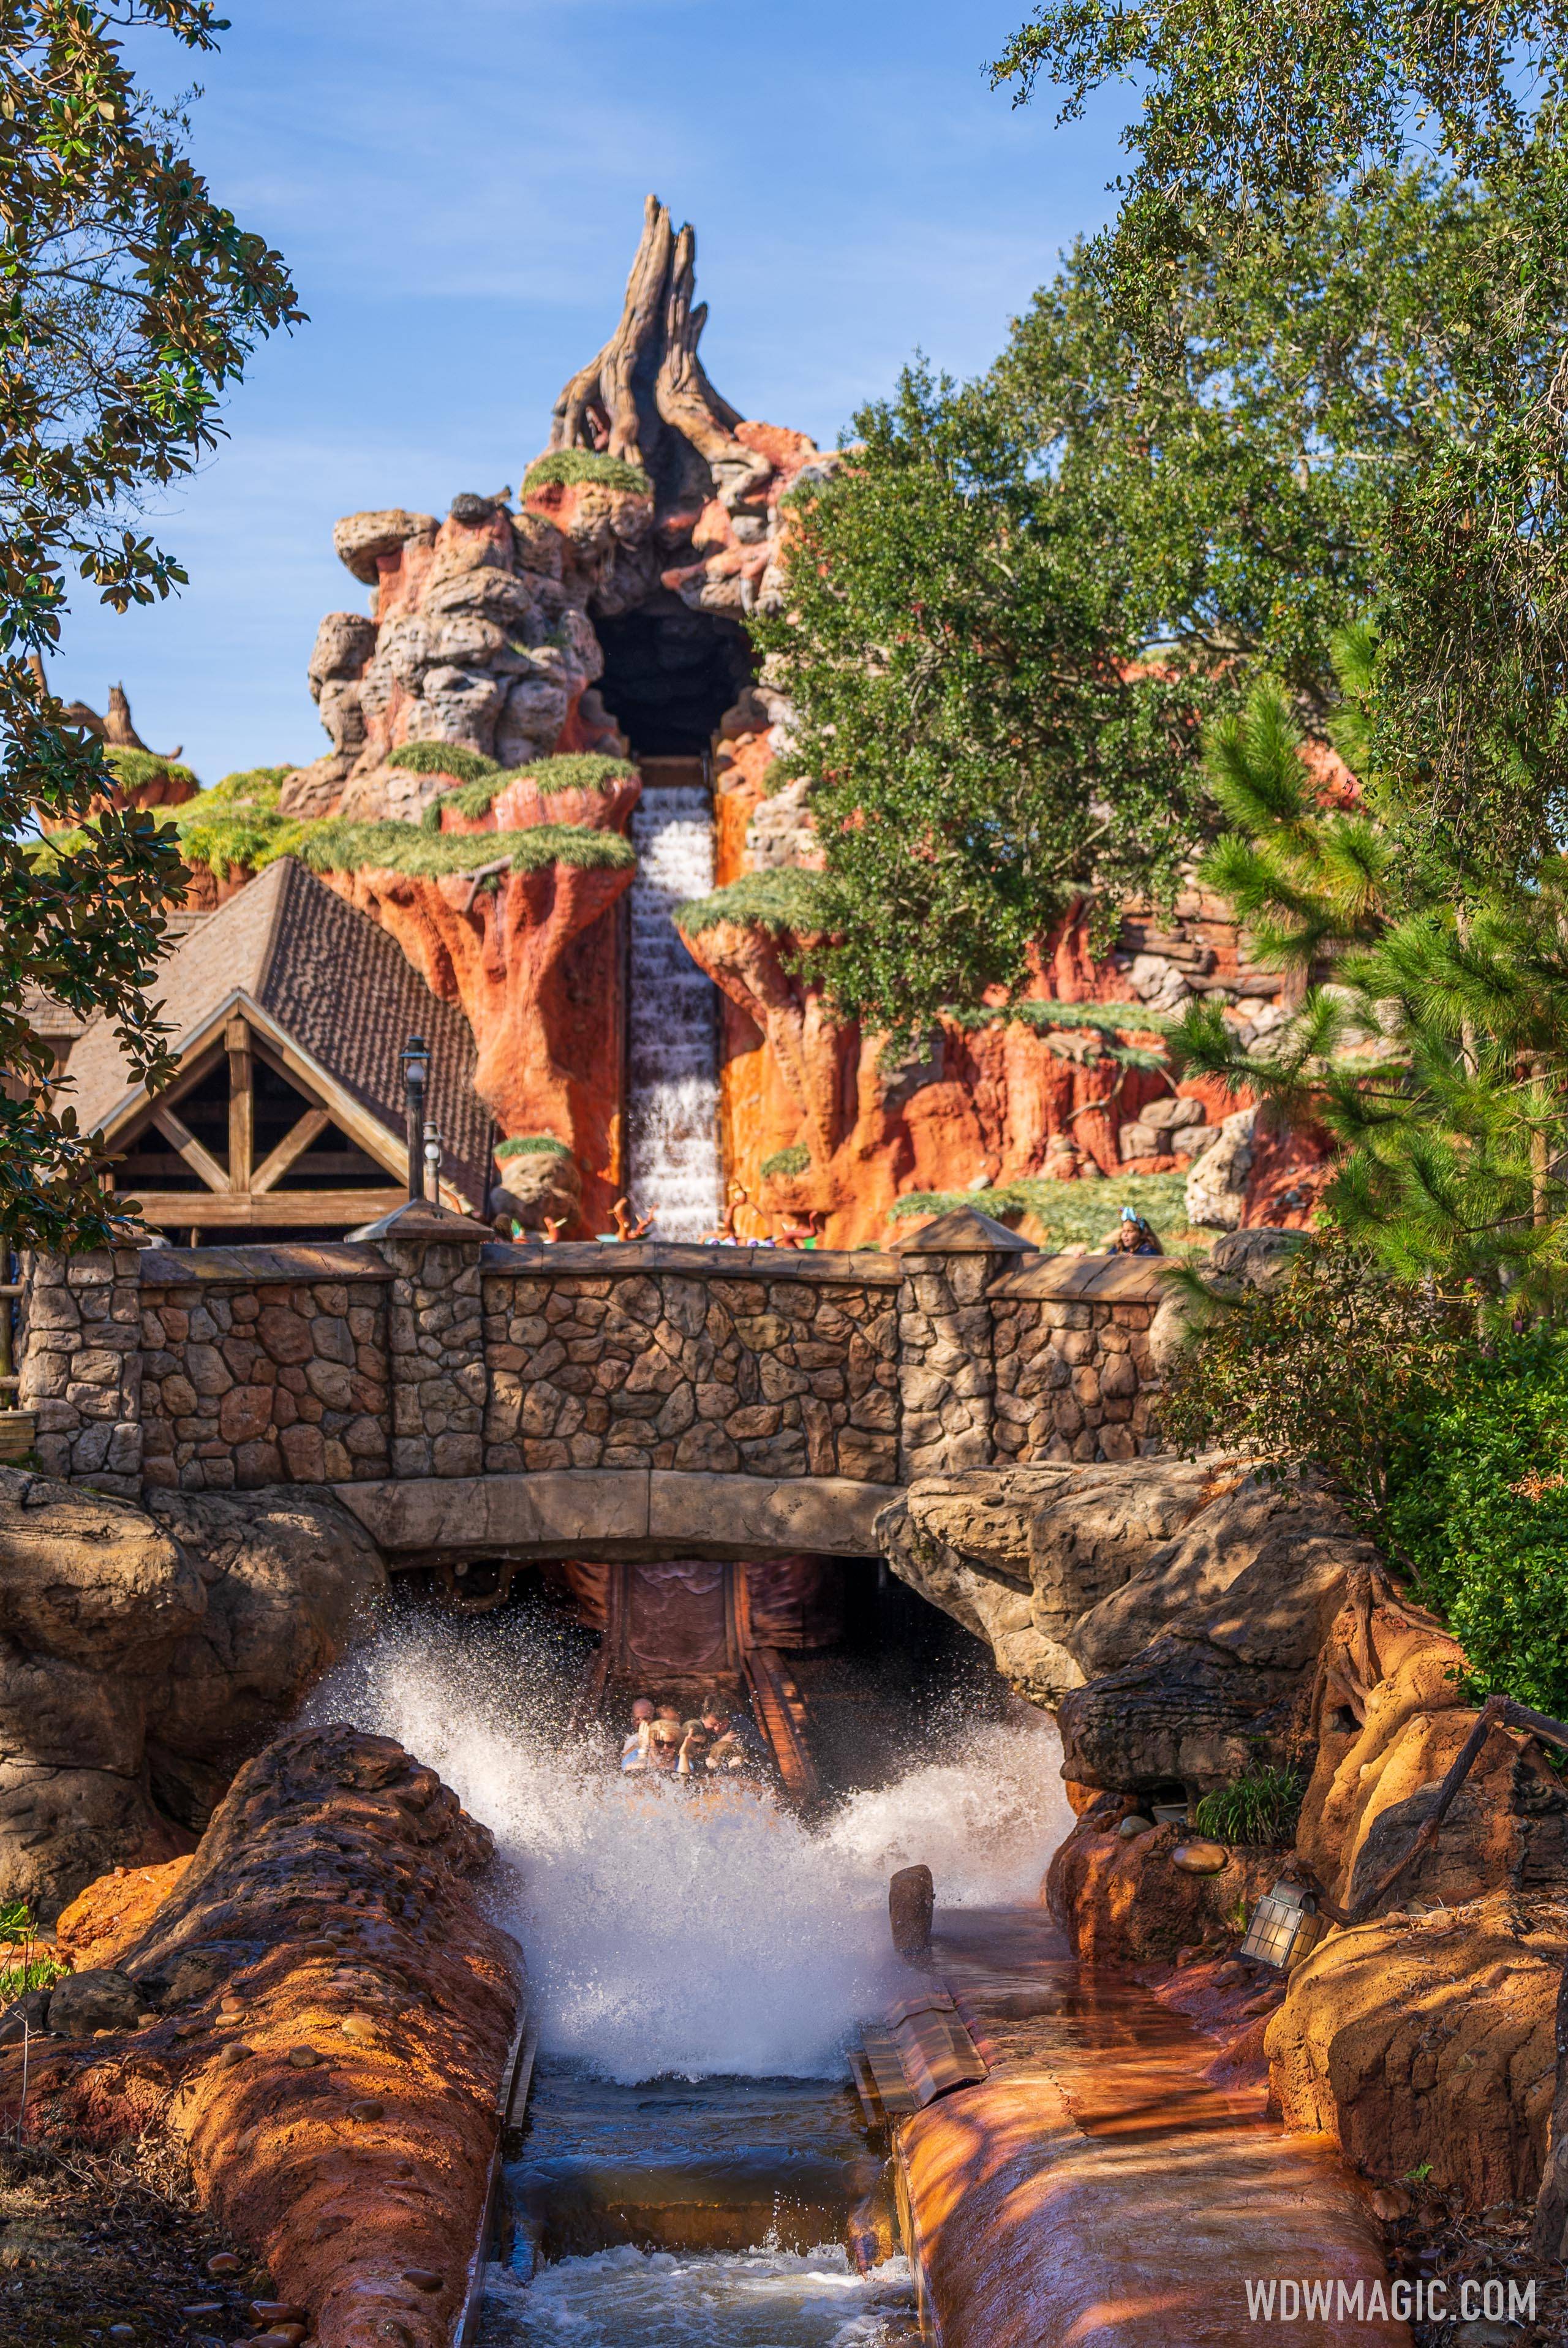 Last chance to ride Splash Mountain as the classic Magic Kingdom attraction permanently closes this weekend